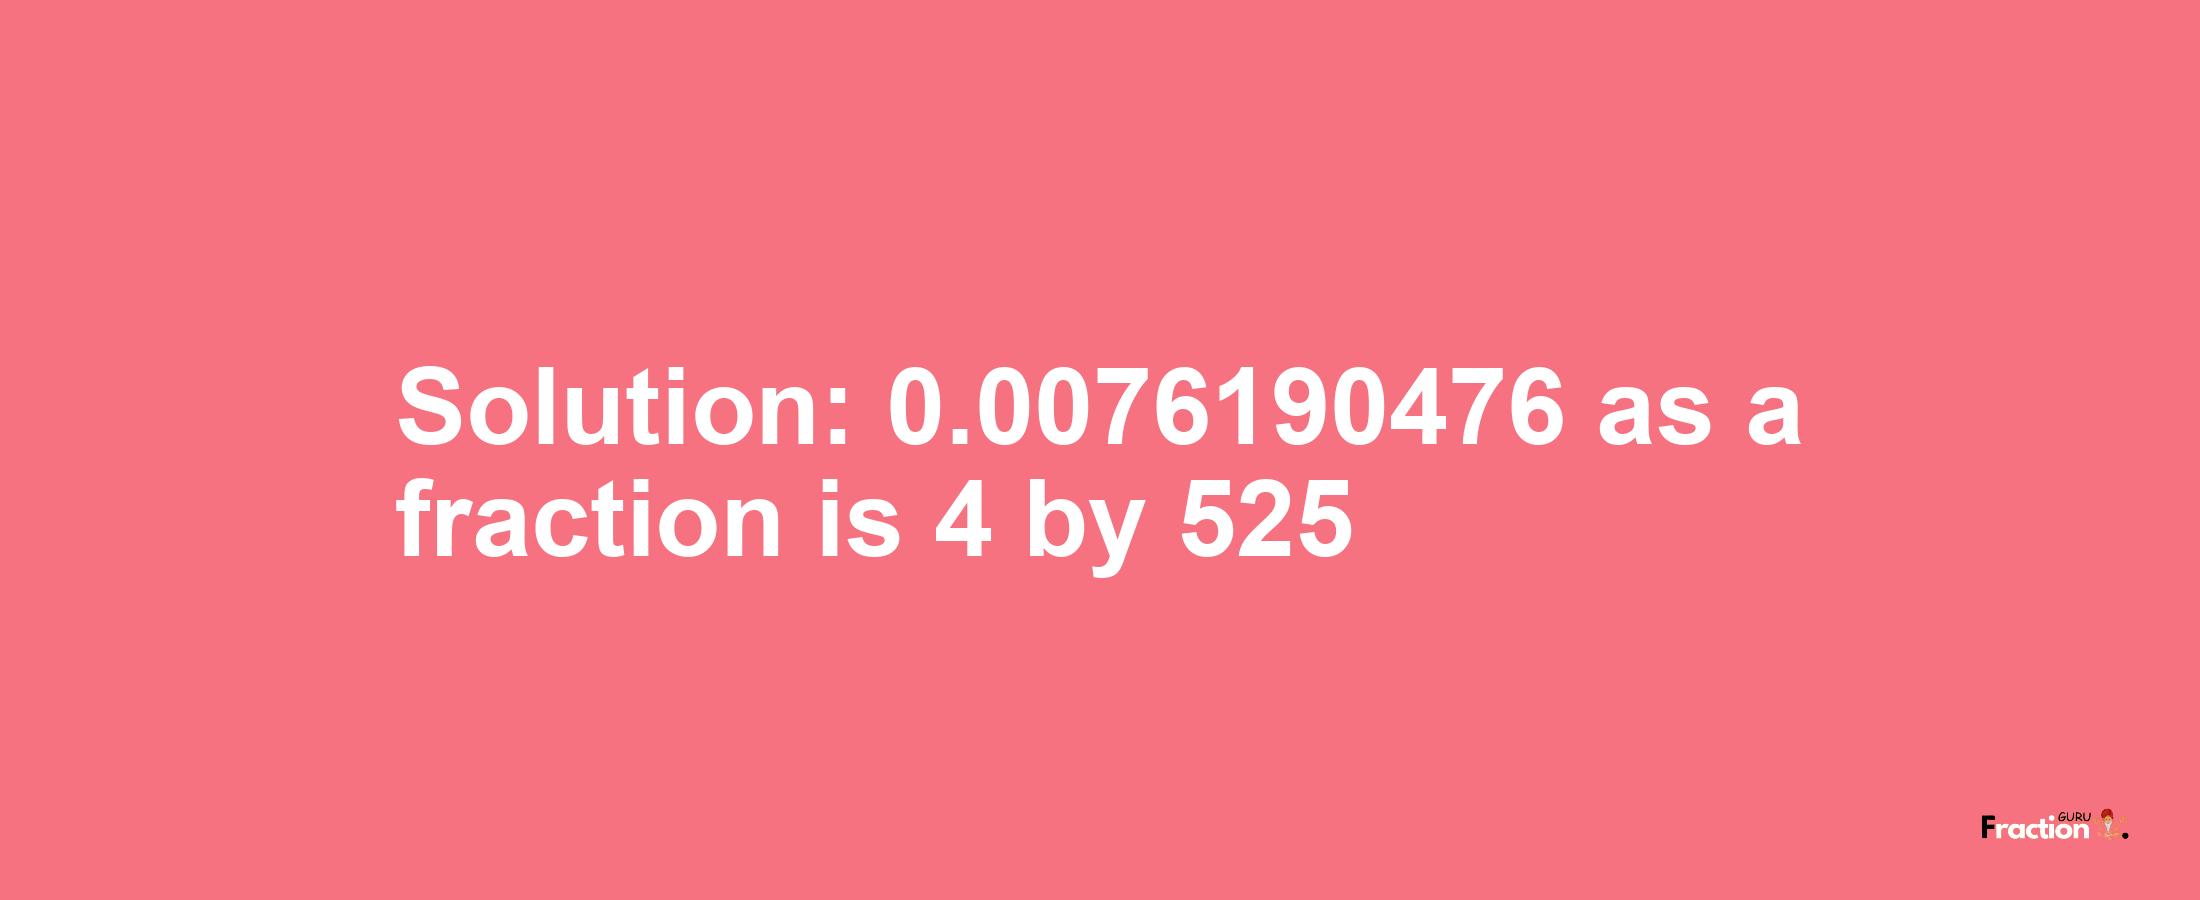 Solution:0.0076190476 as a fraction is 4/525